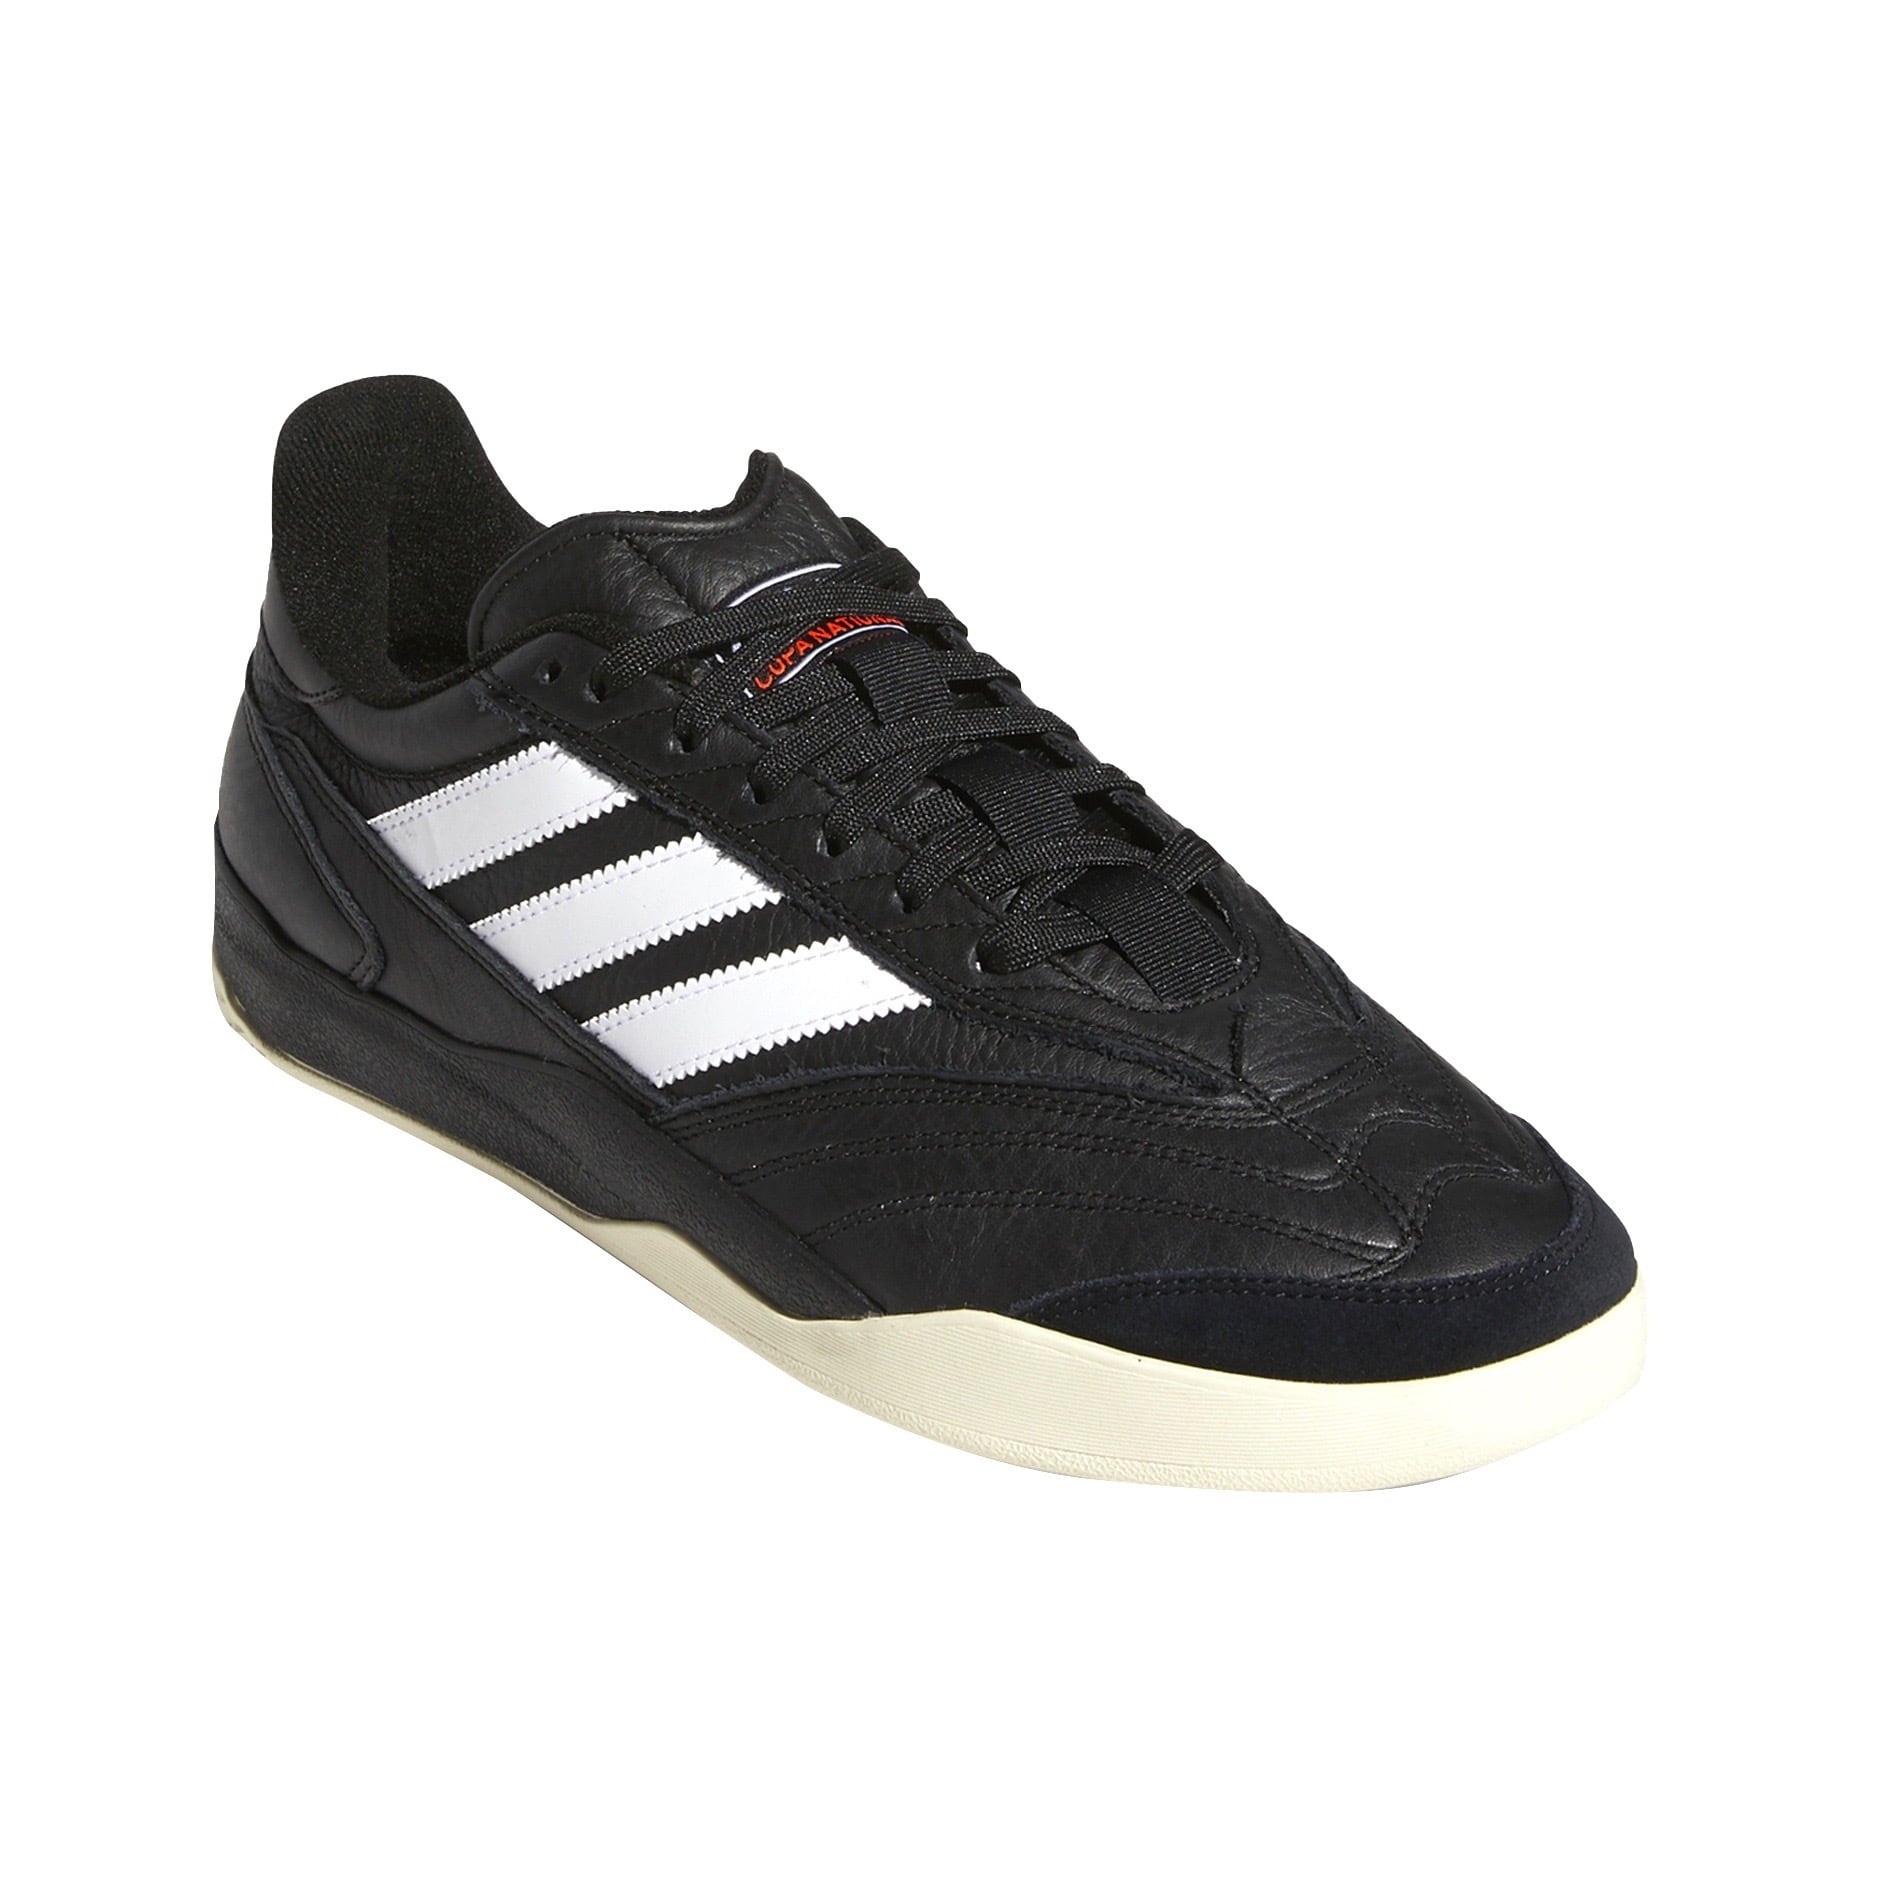 ADIDAS SB / COPA NATIONALE -BLACK- | THE NEWAGE CLUB powered by BASE